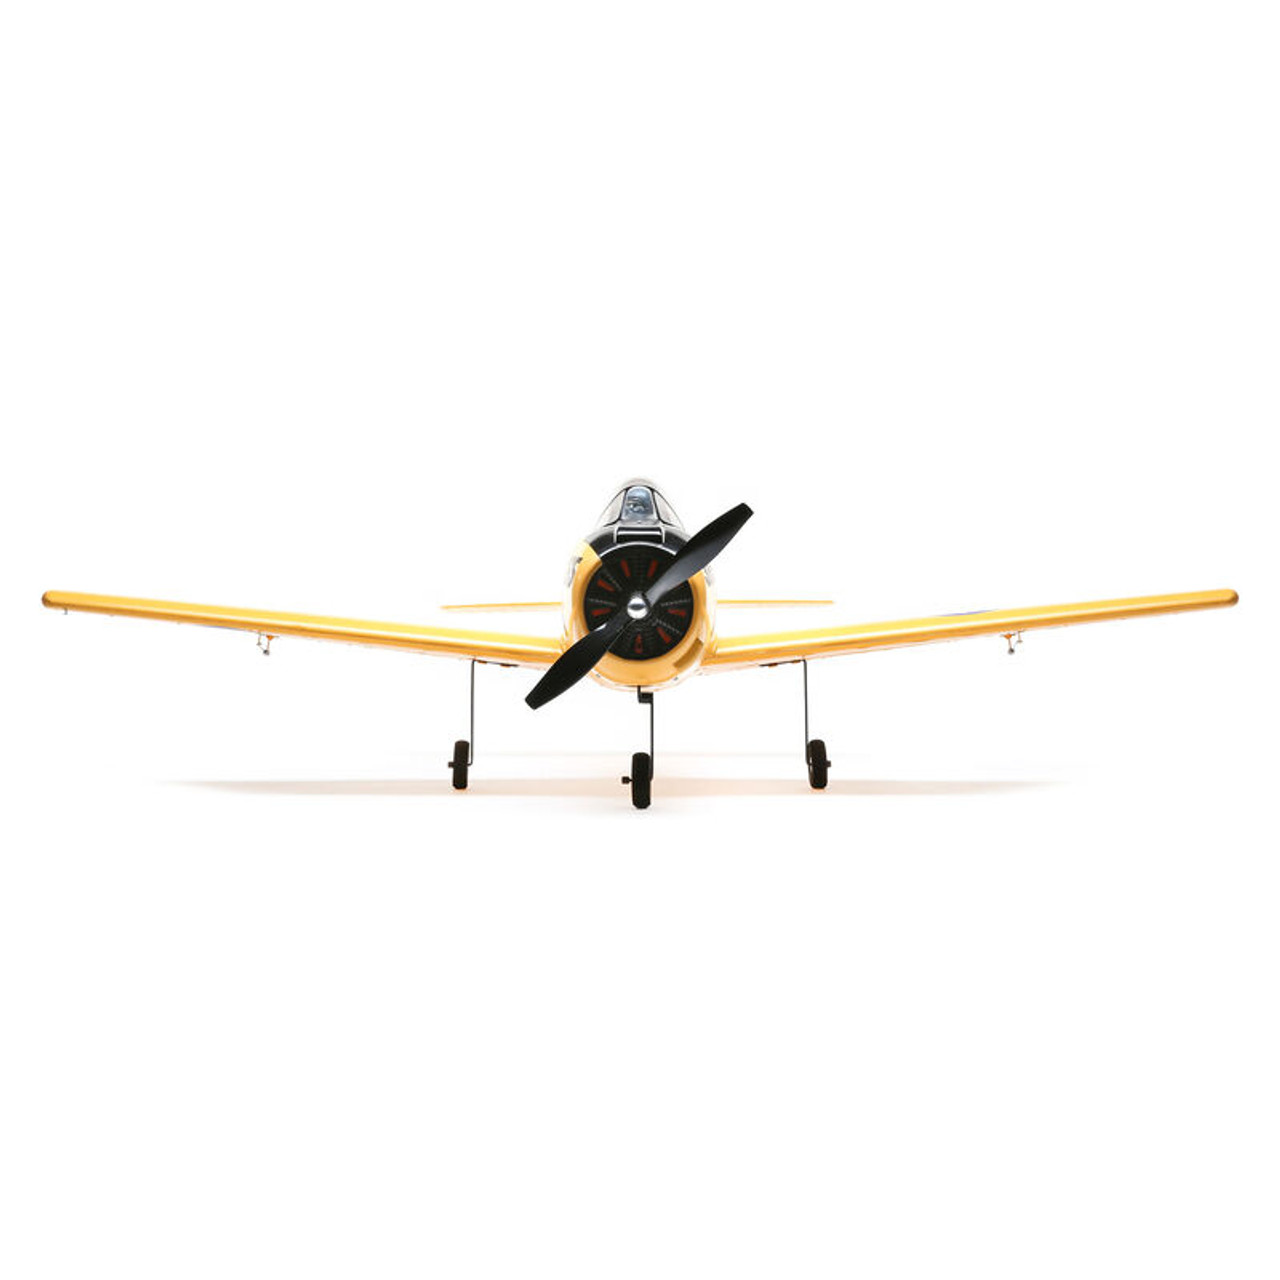 Eflite T-28 Trojan 1.1m BNF Basic with AS3X and SAFE Select